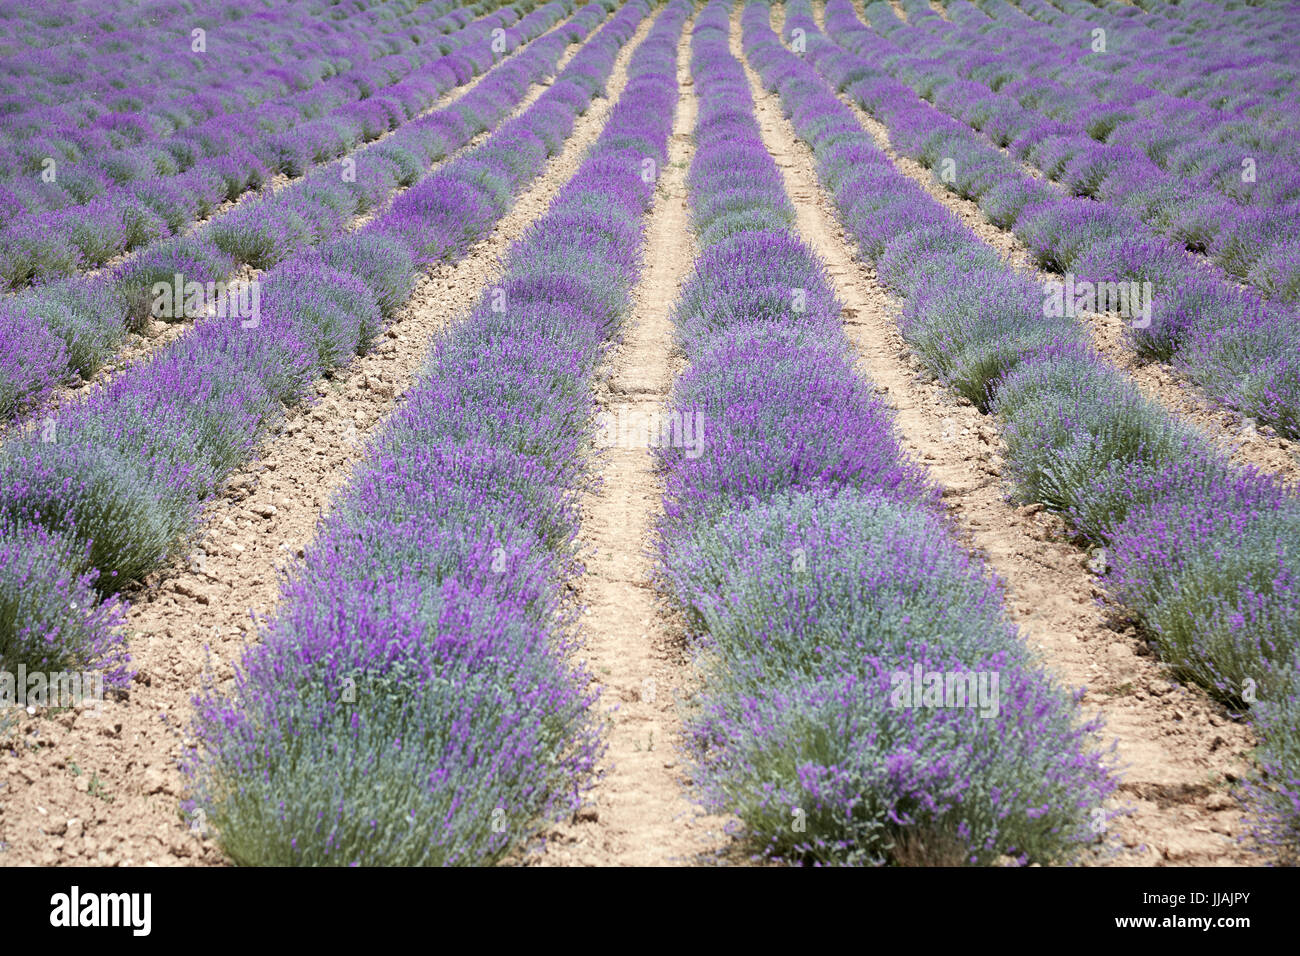 Lavender cultivation field in a sunny summer day Stock Photo